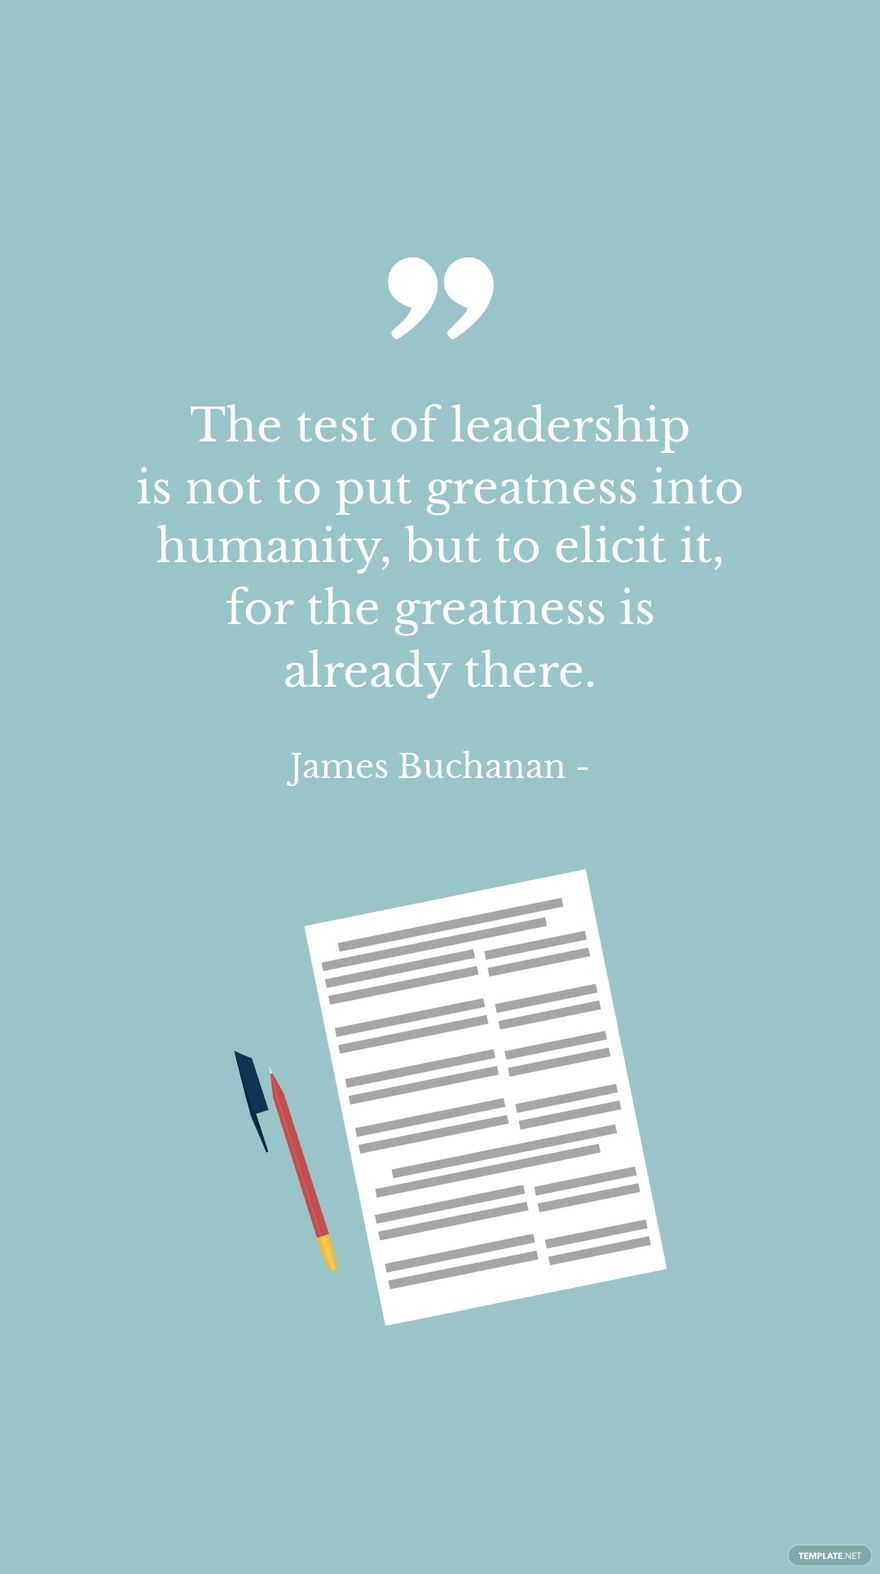 James Buchanan - The test of leadership is not to put greatness into humanity, but to elicit it, for the greatness is already there.